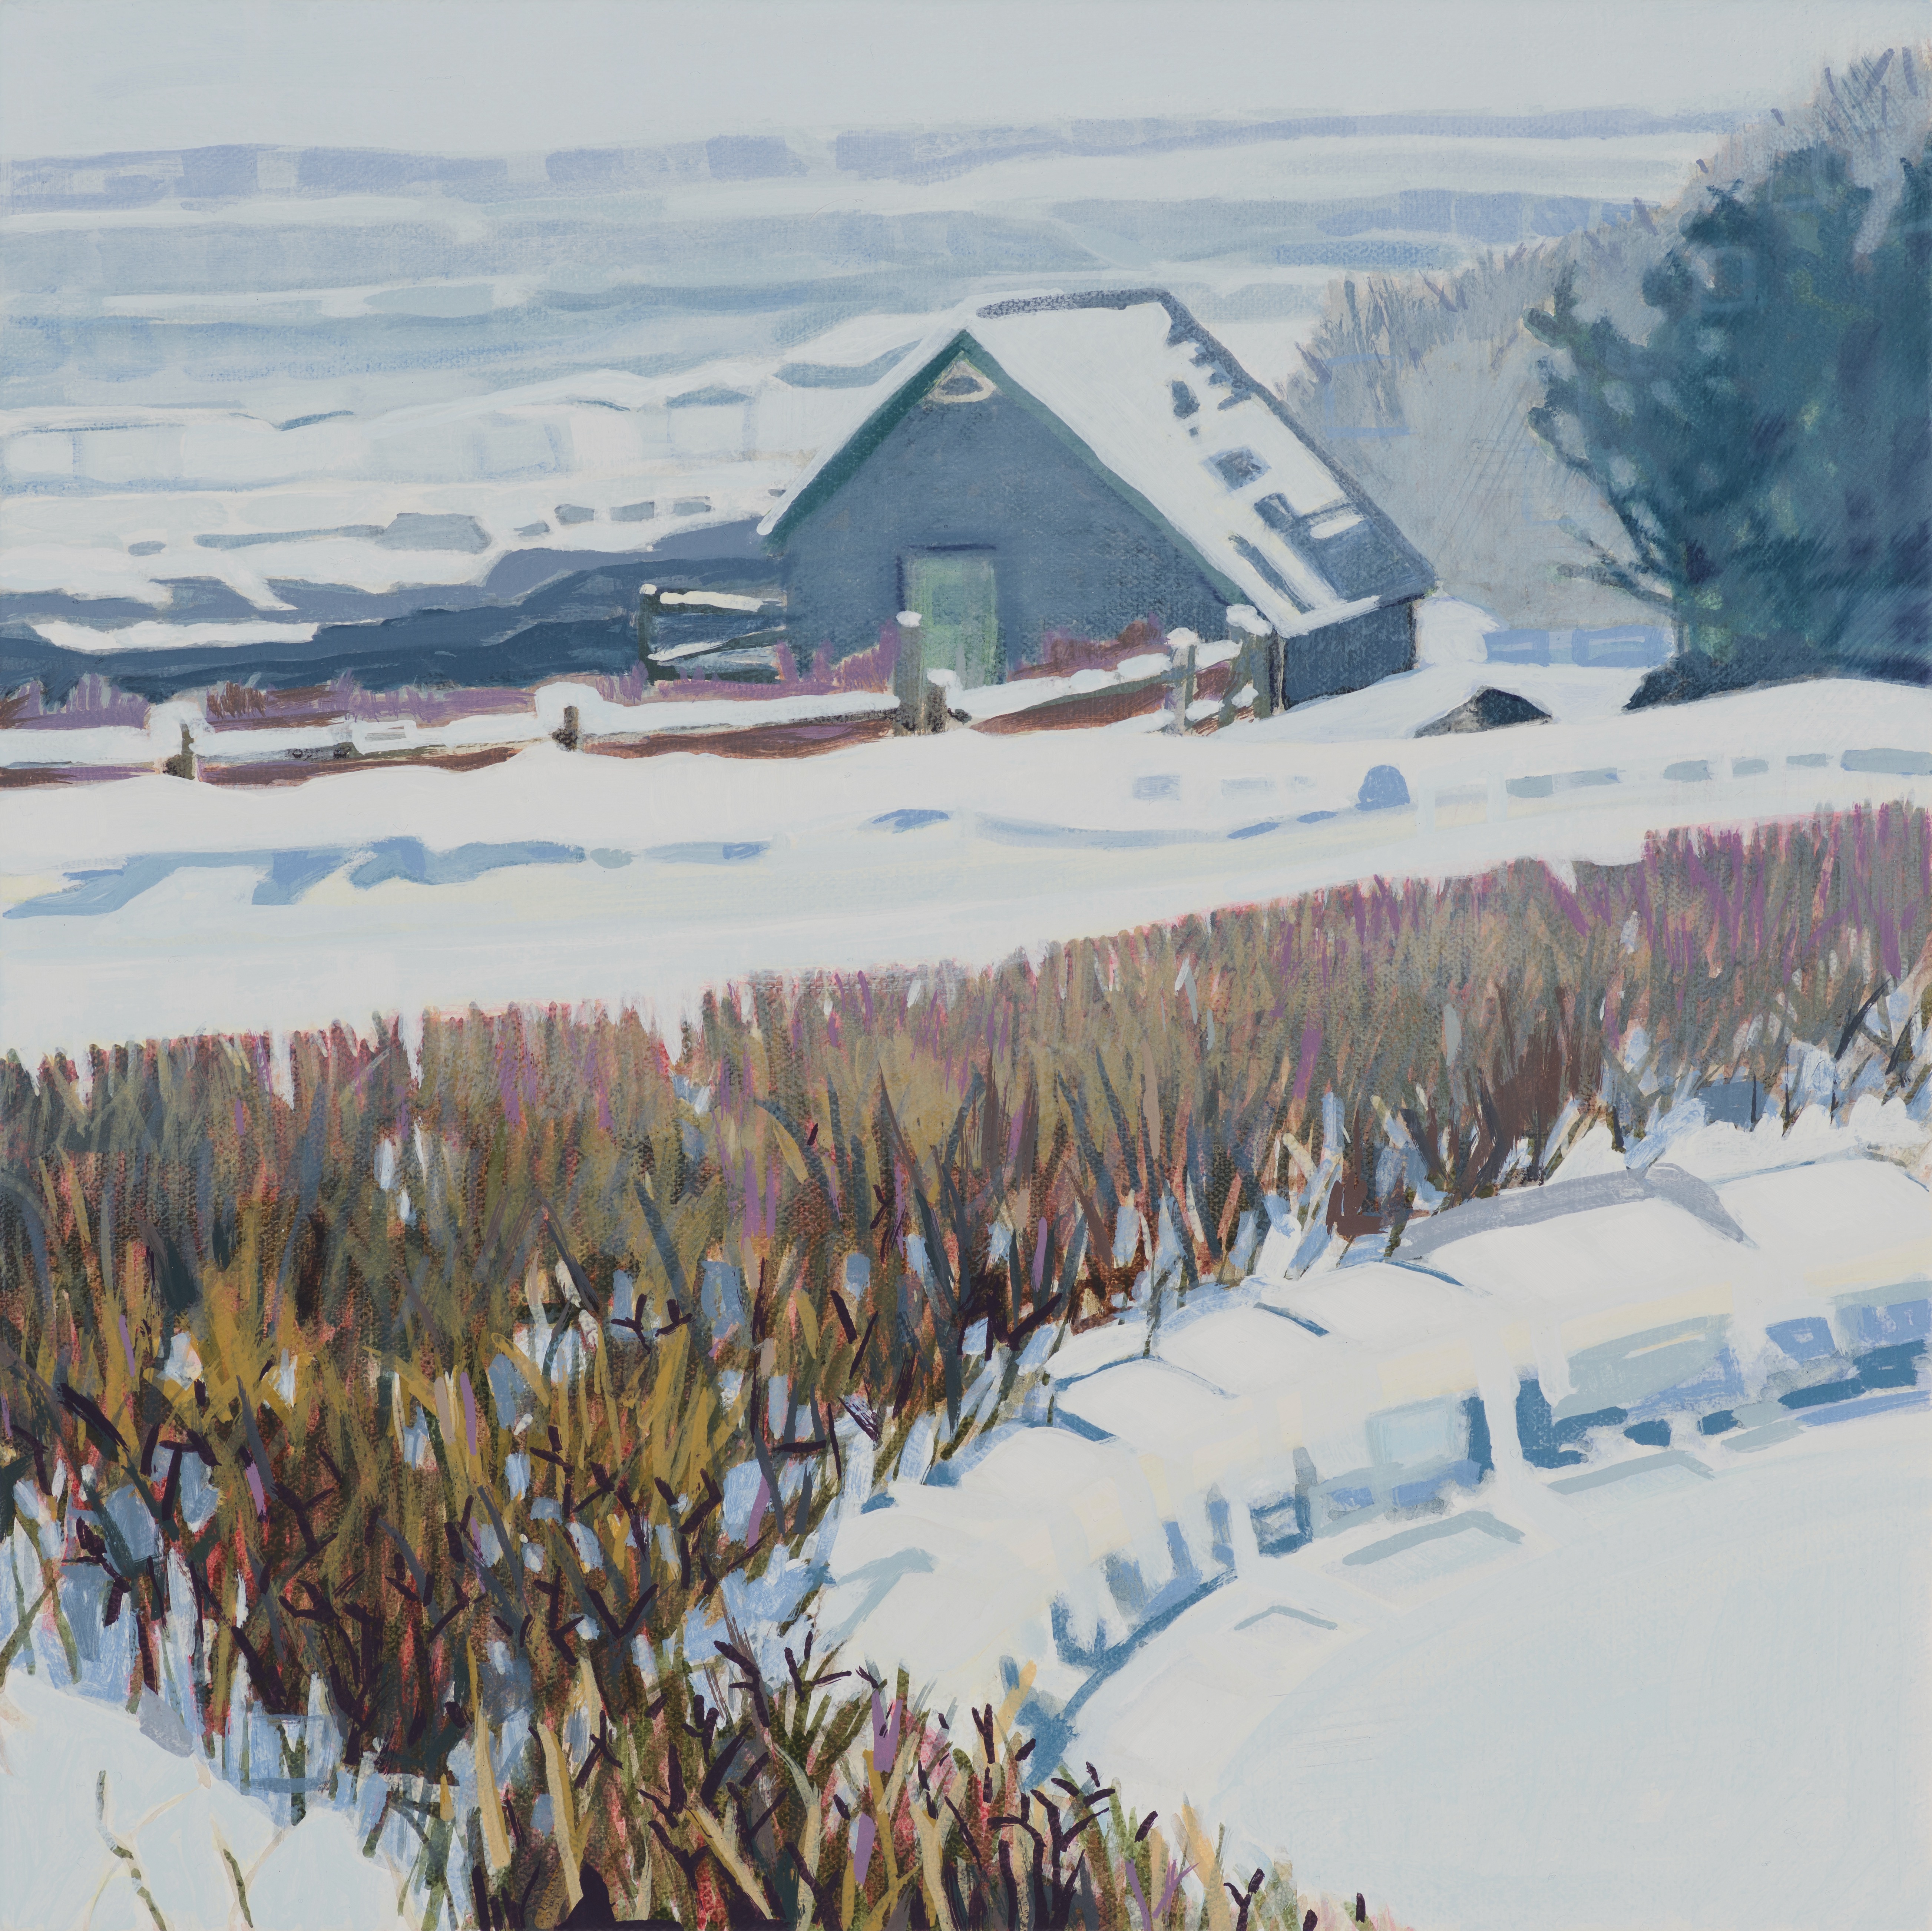 Winter Storm, 1/20/19, 13:45, 43.534213, -70.314683, 2021, oil on canvas, 12 x 12 inches